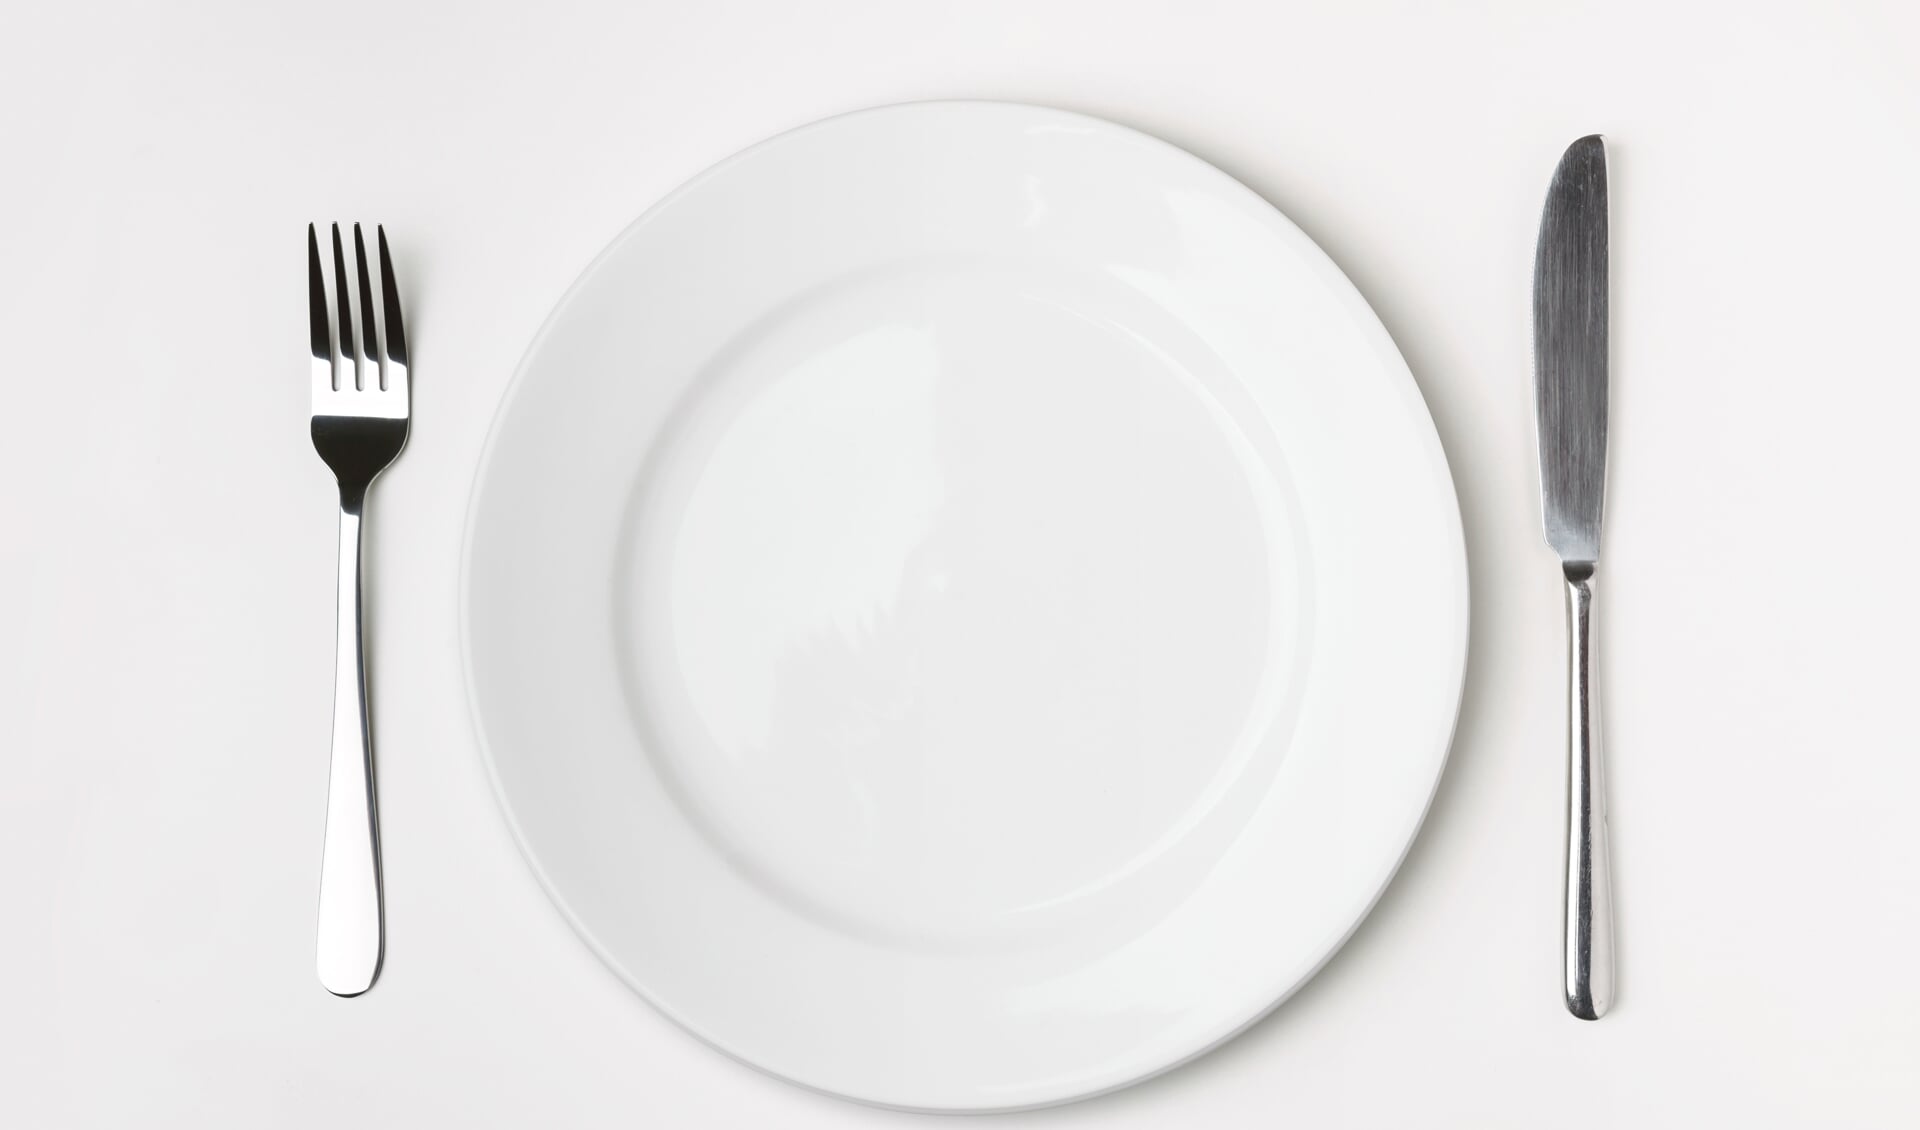 Knife, Fork and plate on table isolated.